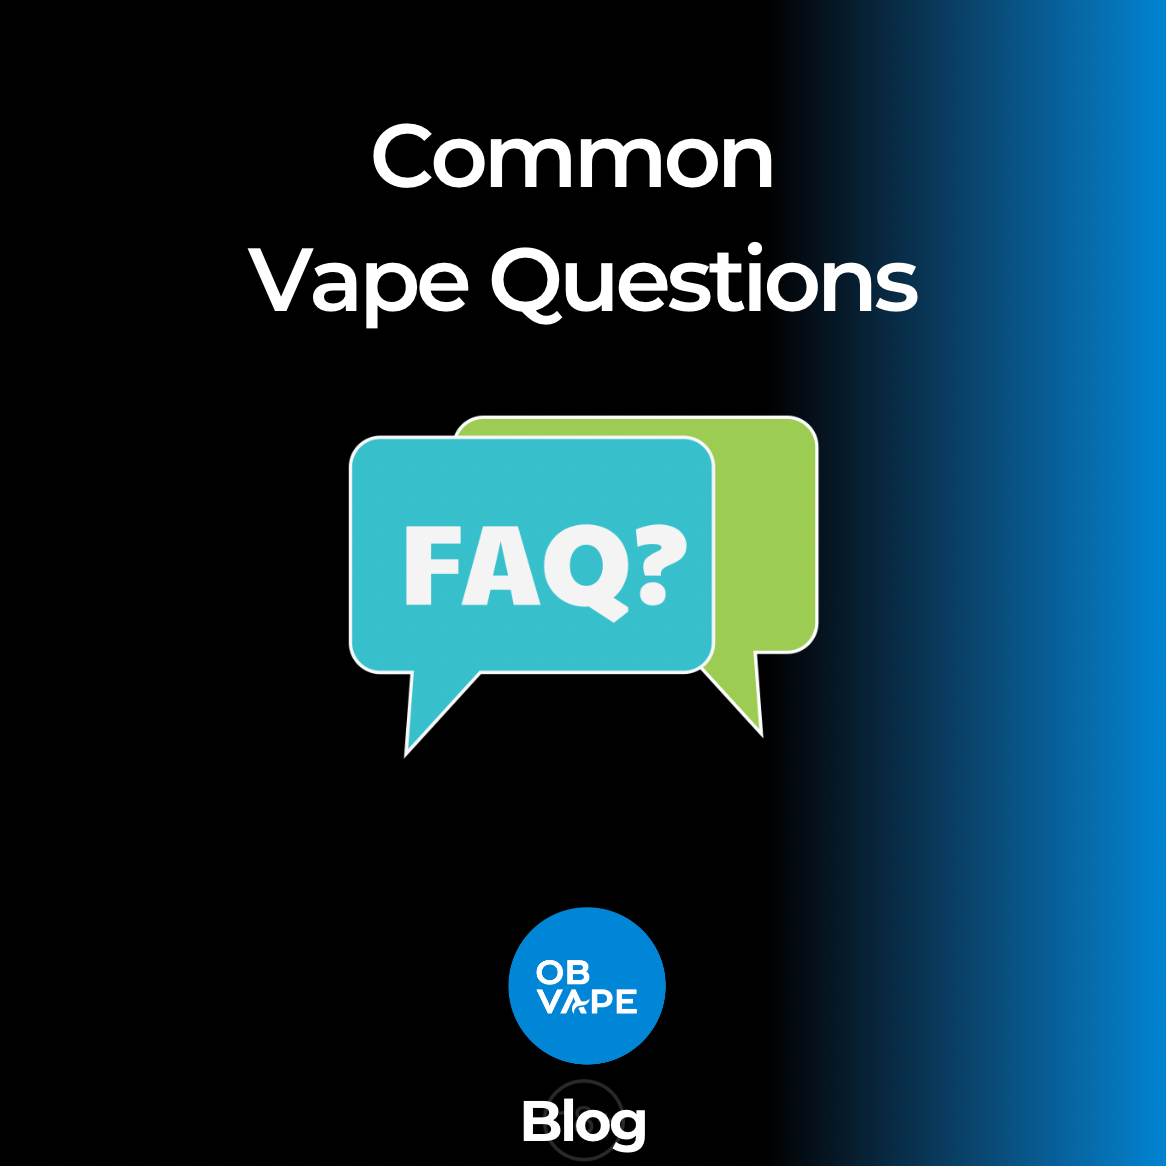 Commonly Asked Questions About Vaping